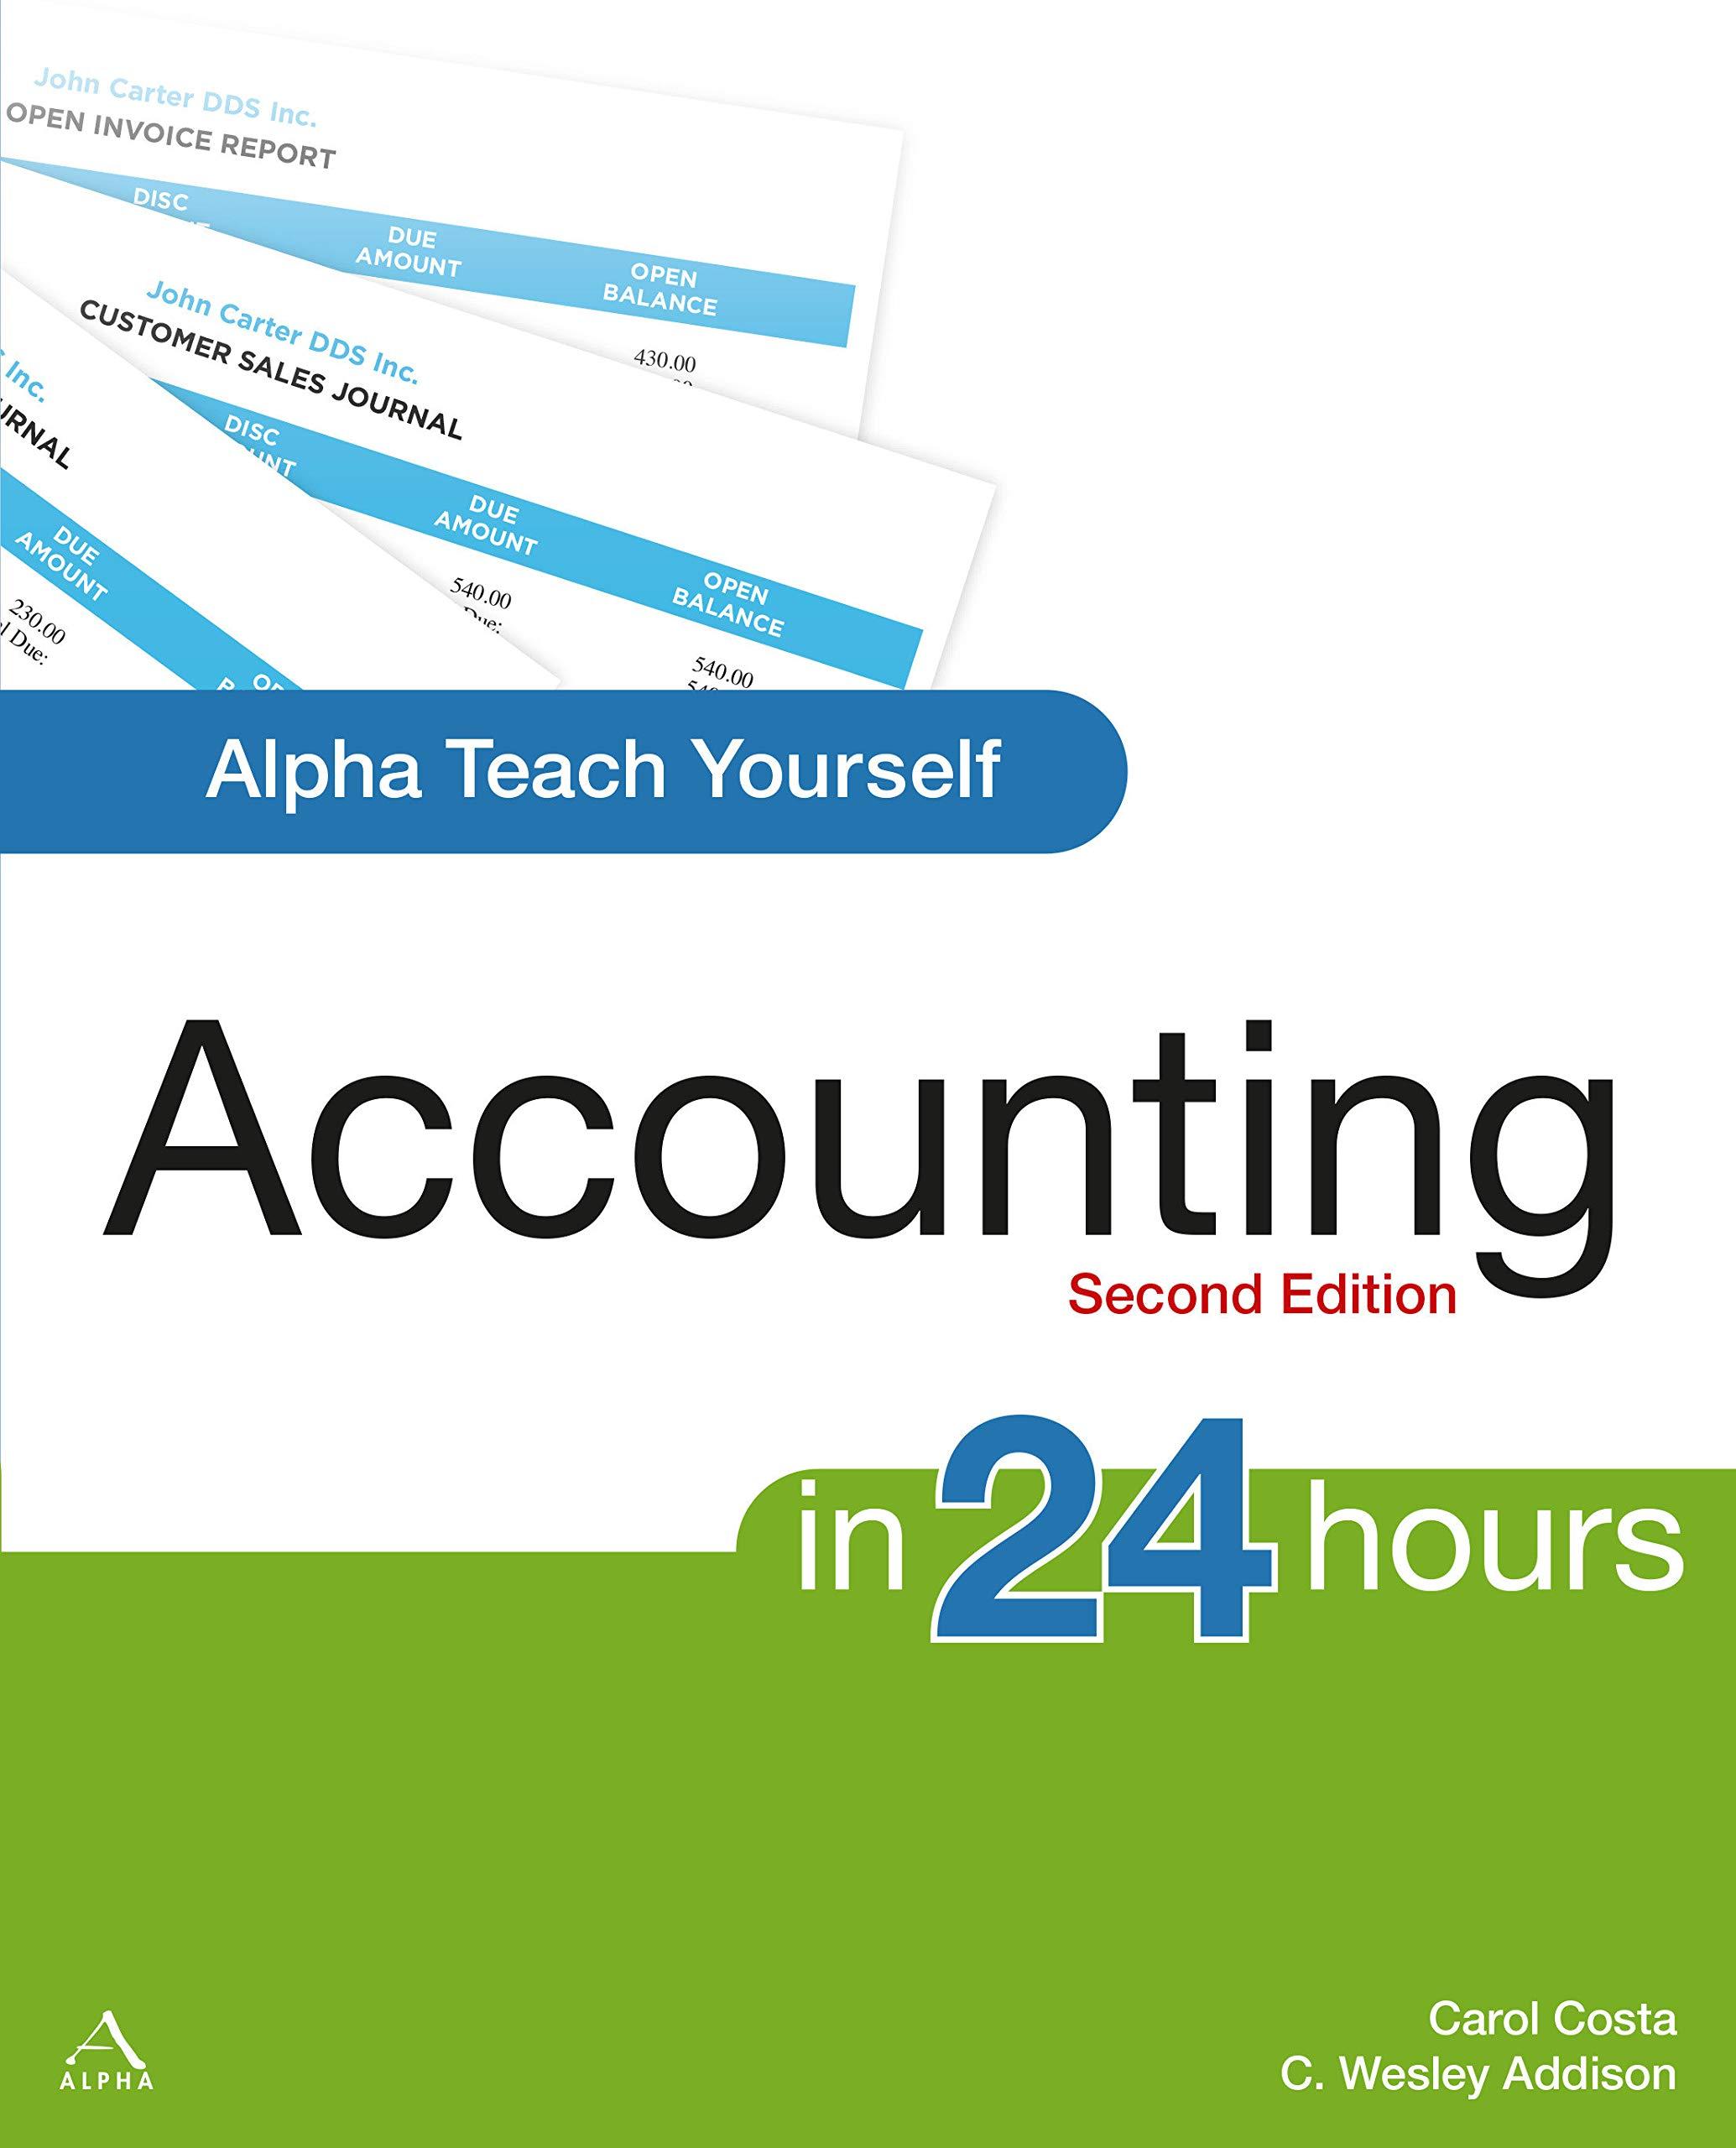 alpha teach yourself accounting in 24 hours 2nd edition carol costa, c. wesley addison 1592575021,